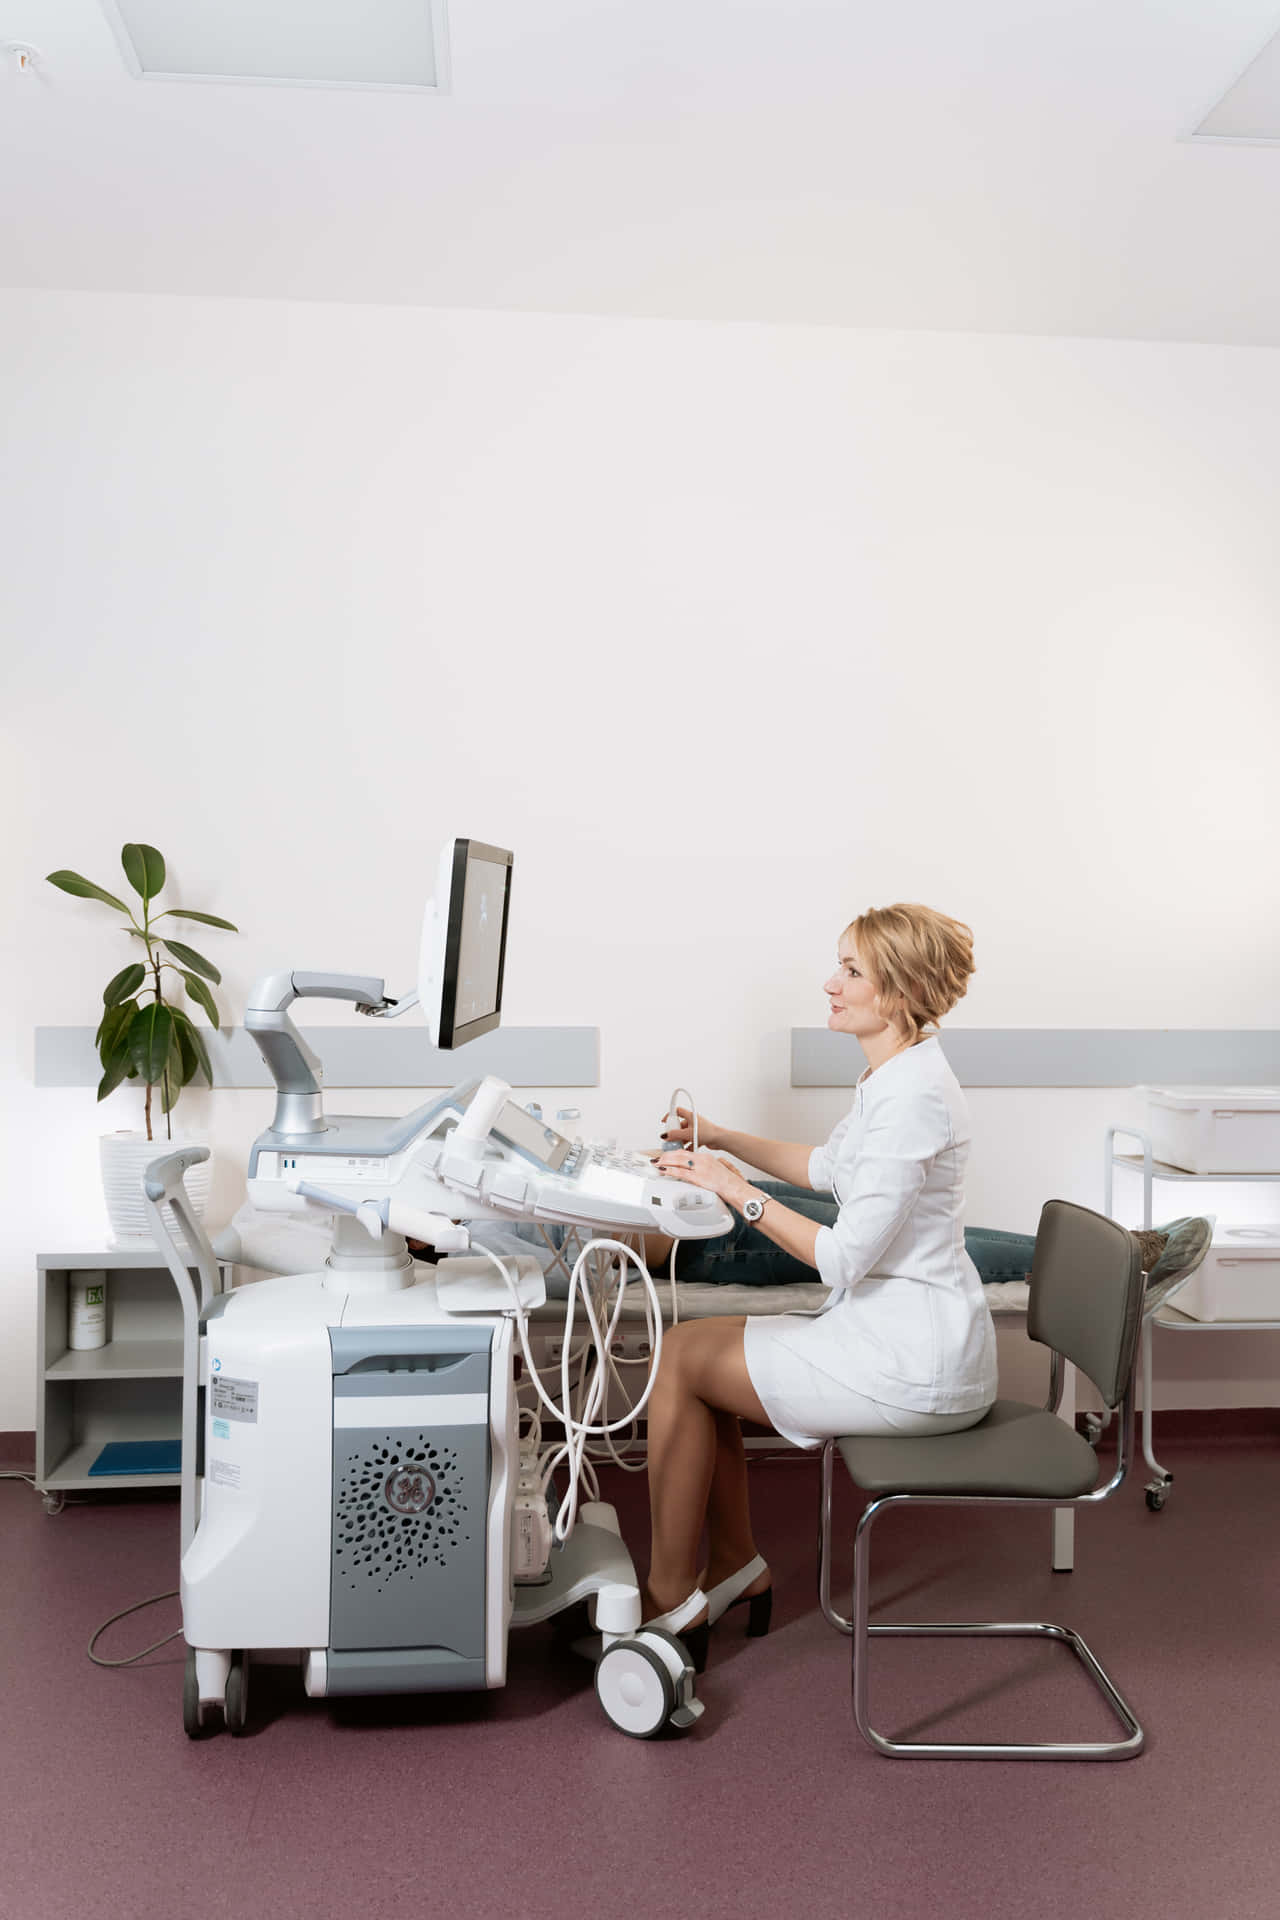 A Woman In A White Dress Is Sitting At A Desk